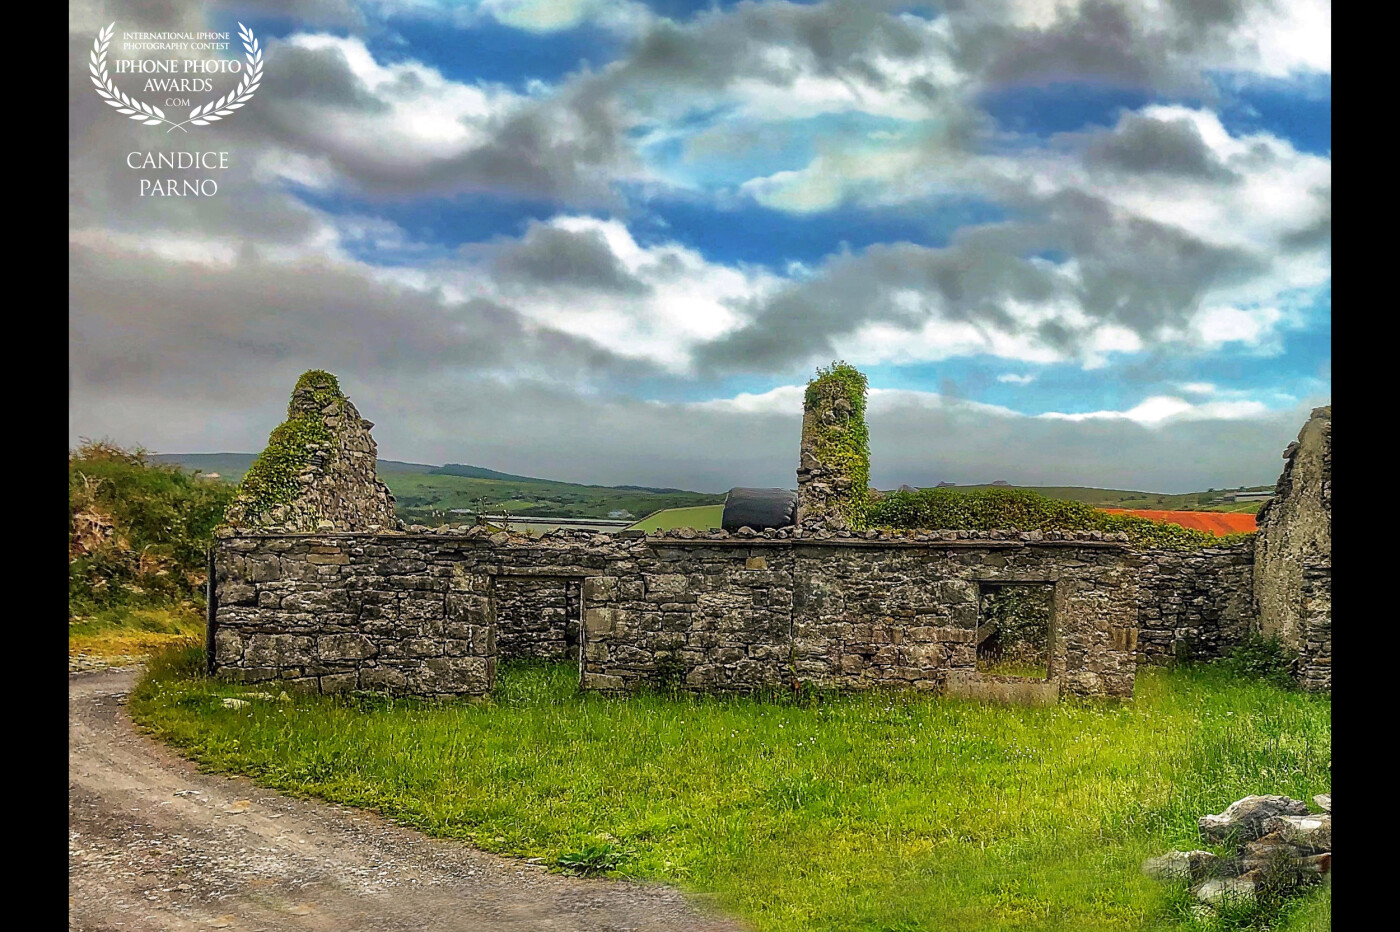 There’s something about old stone buildings that is so magnificent to photograph.  The colours of the stones, the textures, the history.     Who lived here once and what was their life like?  If only the camera could go back in time to reveal the answers.